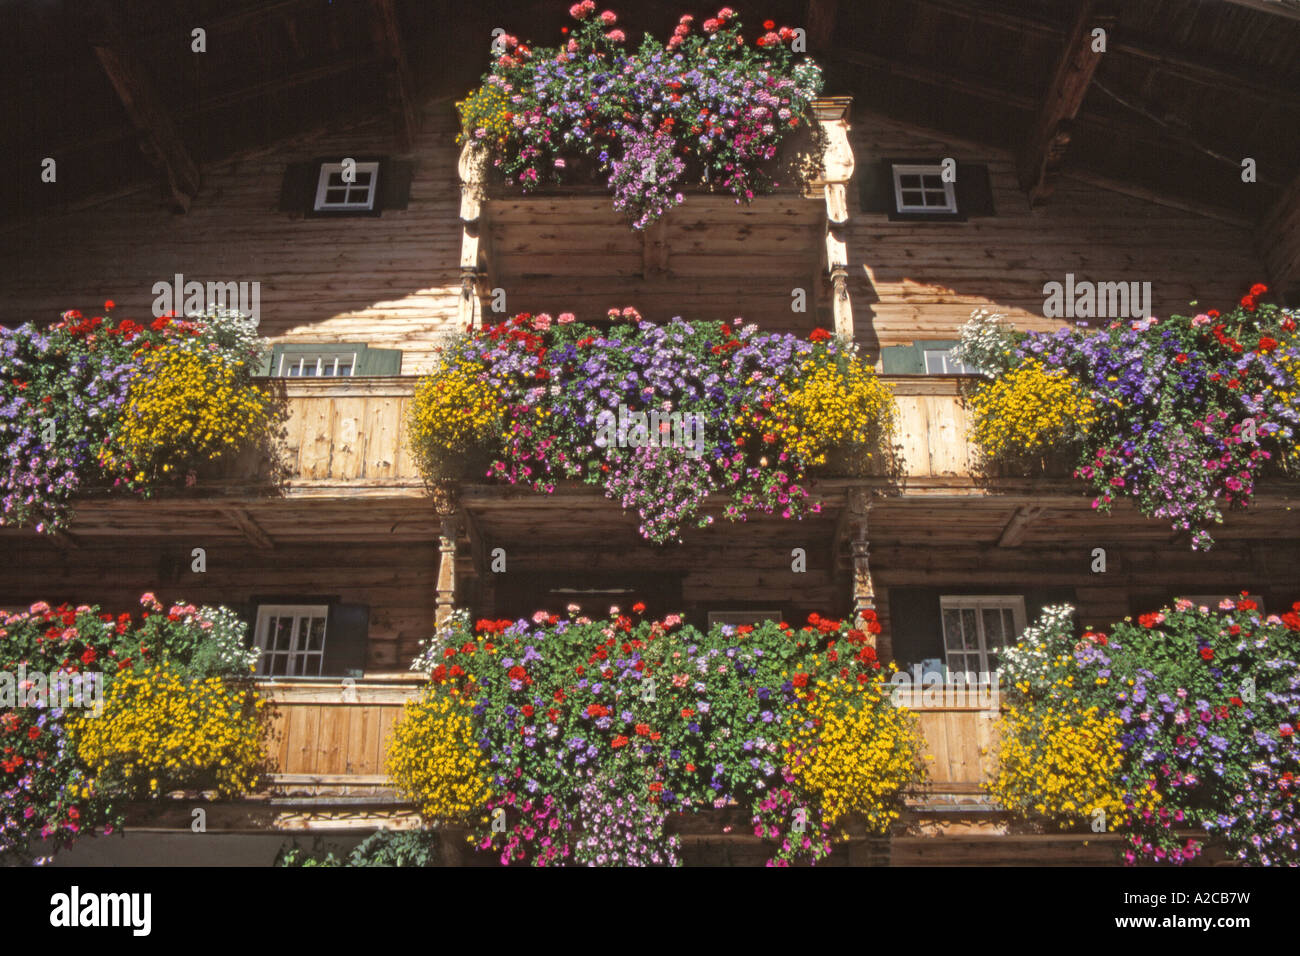 Well-filled flower boxes decorate a house in the village of Aurach, Tyrol Stock Photo